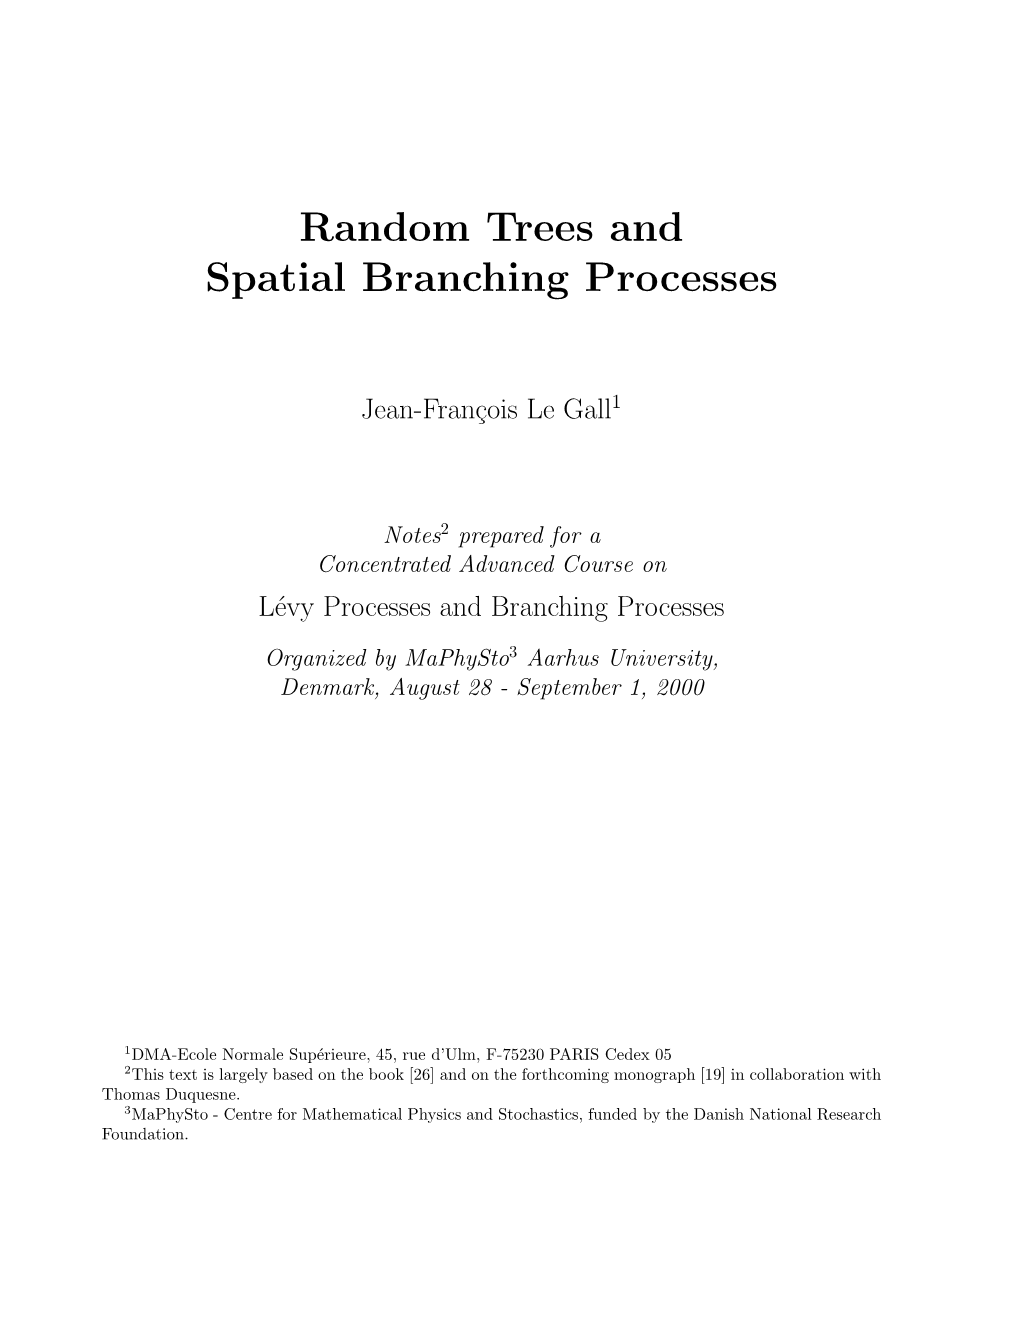 Random Trees and Spatial Branching Processes